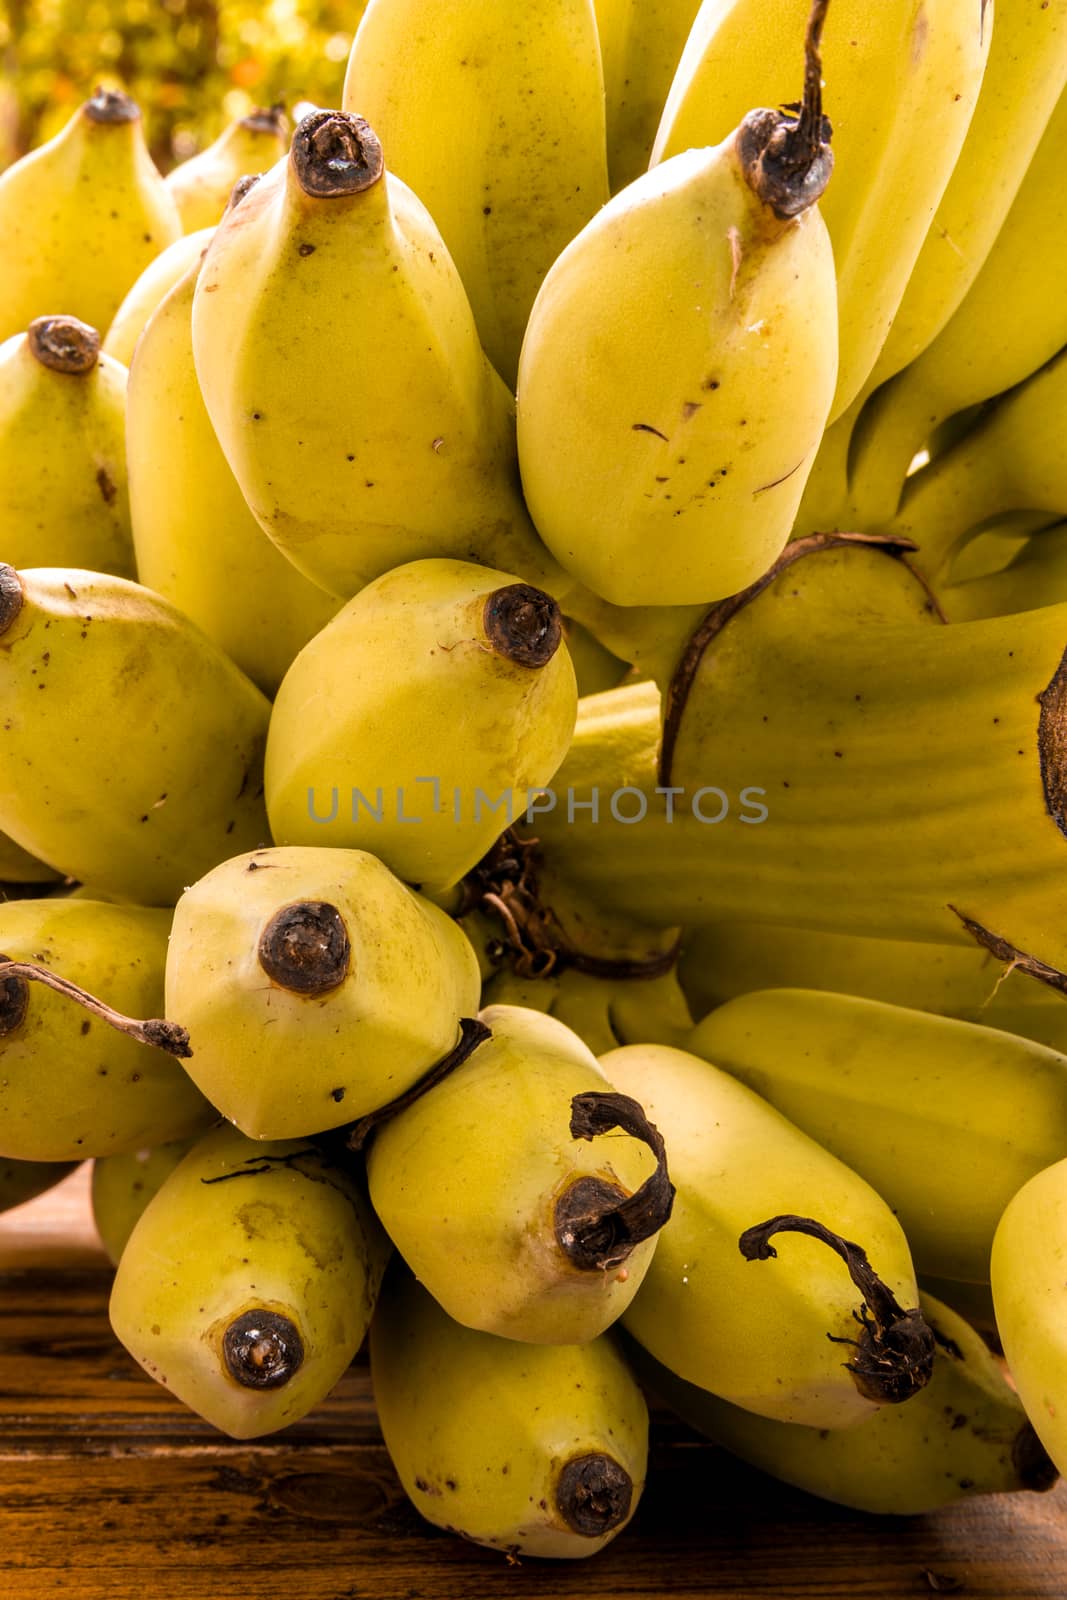 Bunch of ripe banana on wooden background.